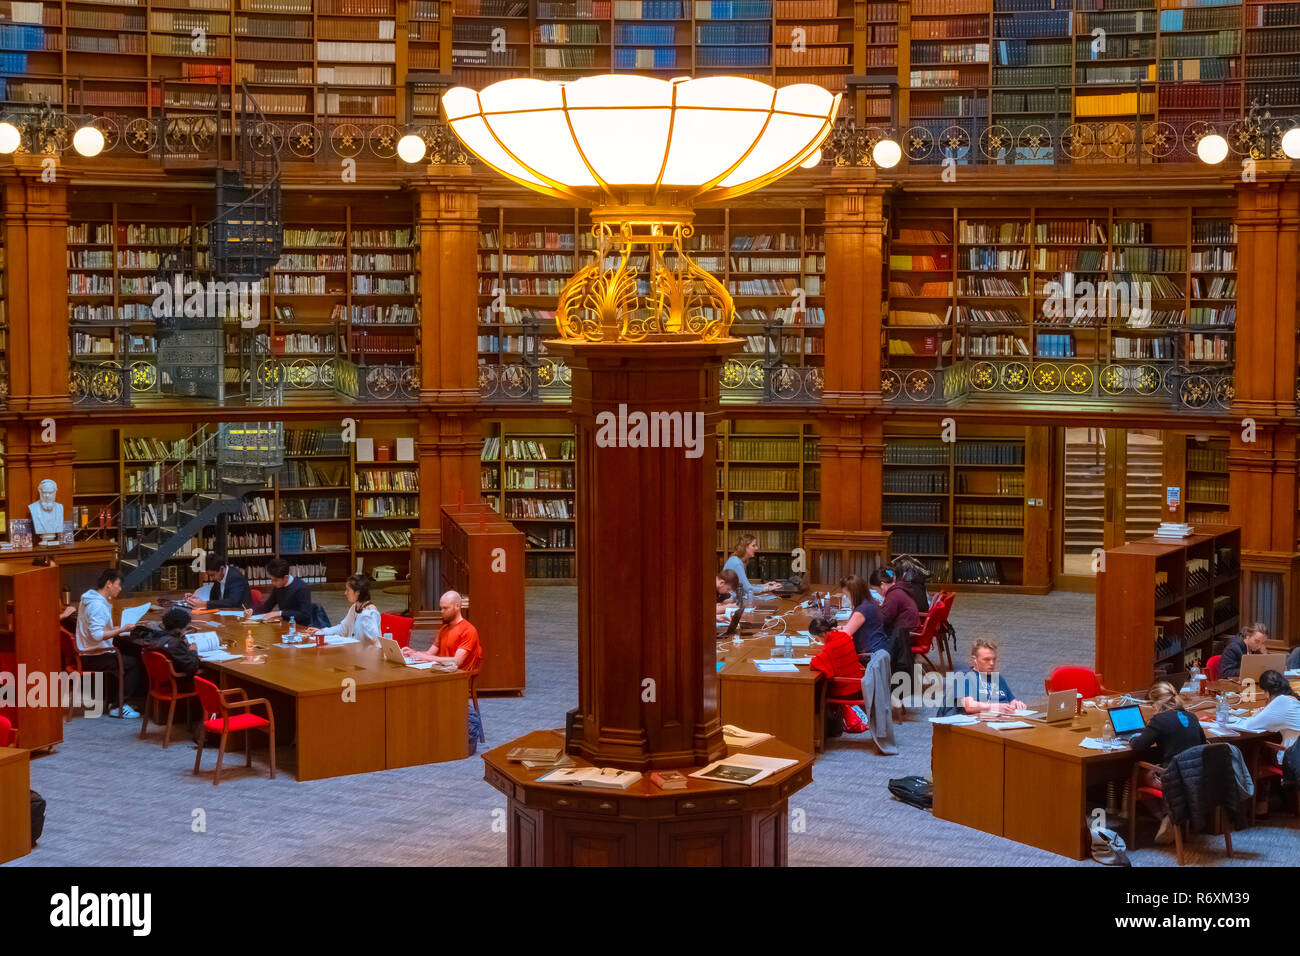 Liverpool, UK - May 16 2018: The Picton Reading Room at Liverpool Central Library was founded in 1875 designed by Cornelius Sherlock and modelled afte Stock Photo